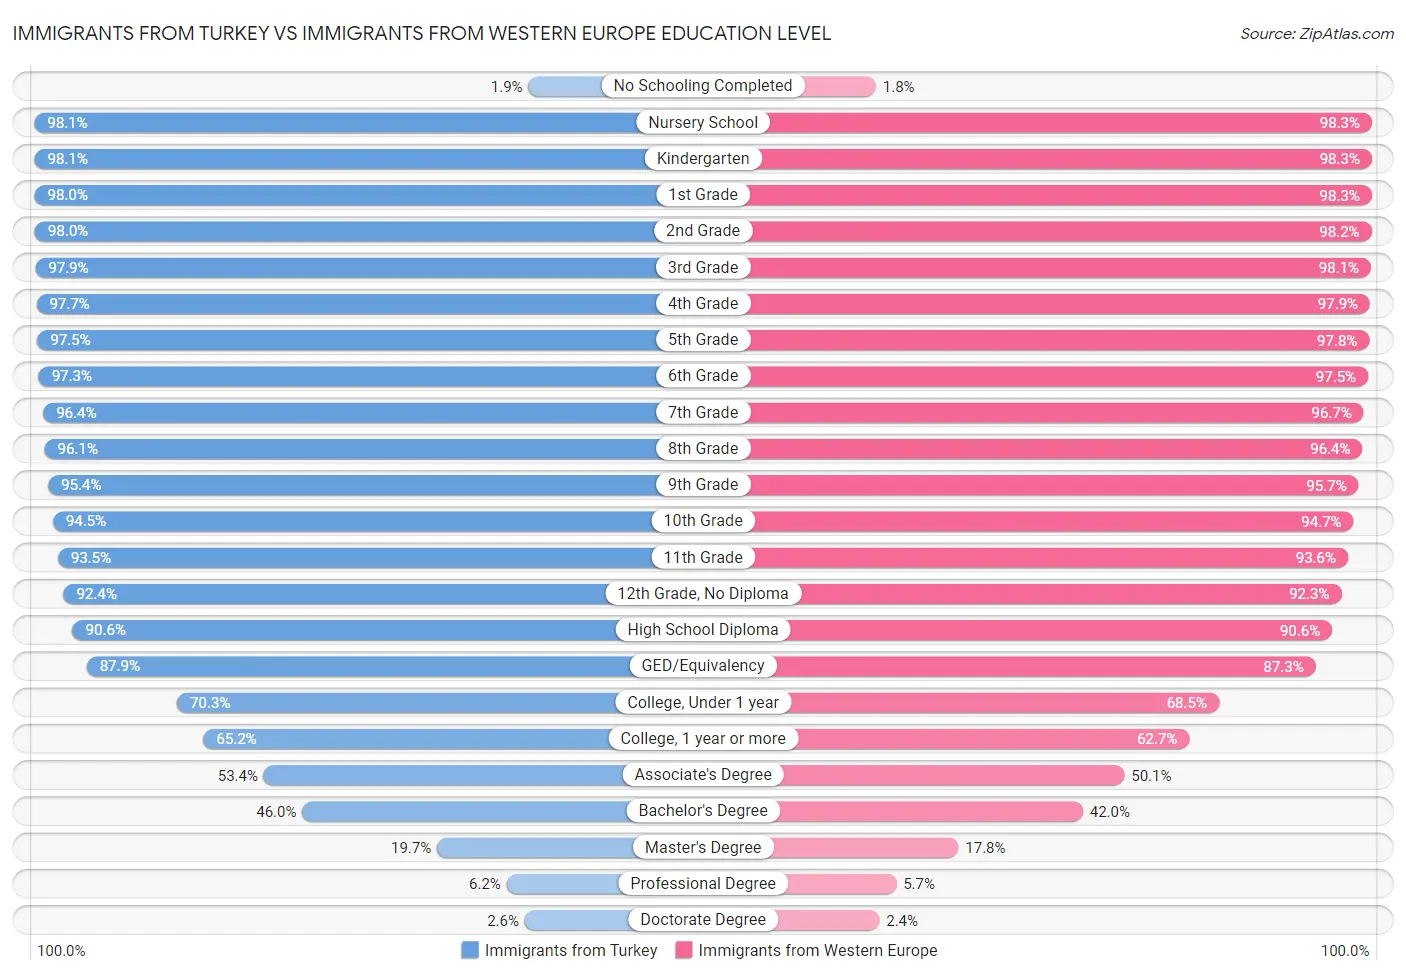 Immigrants from Turkey vs Immigrants from Western Europe Education Level